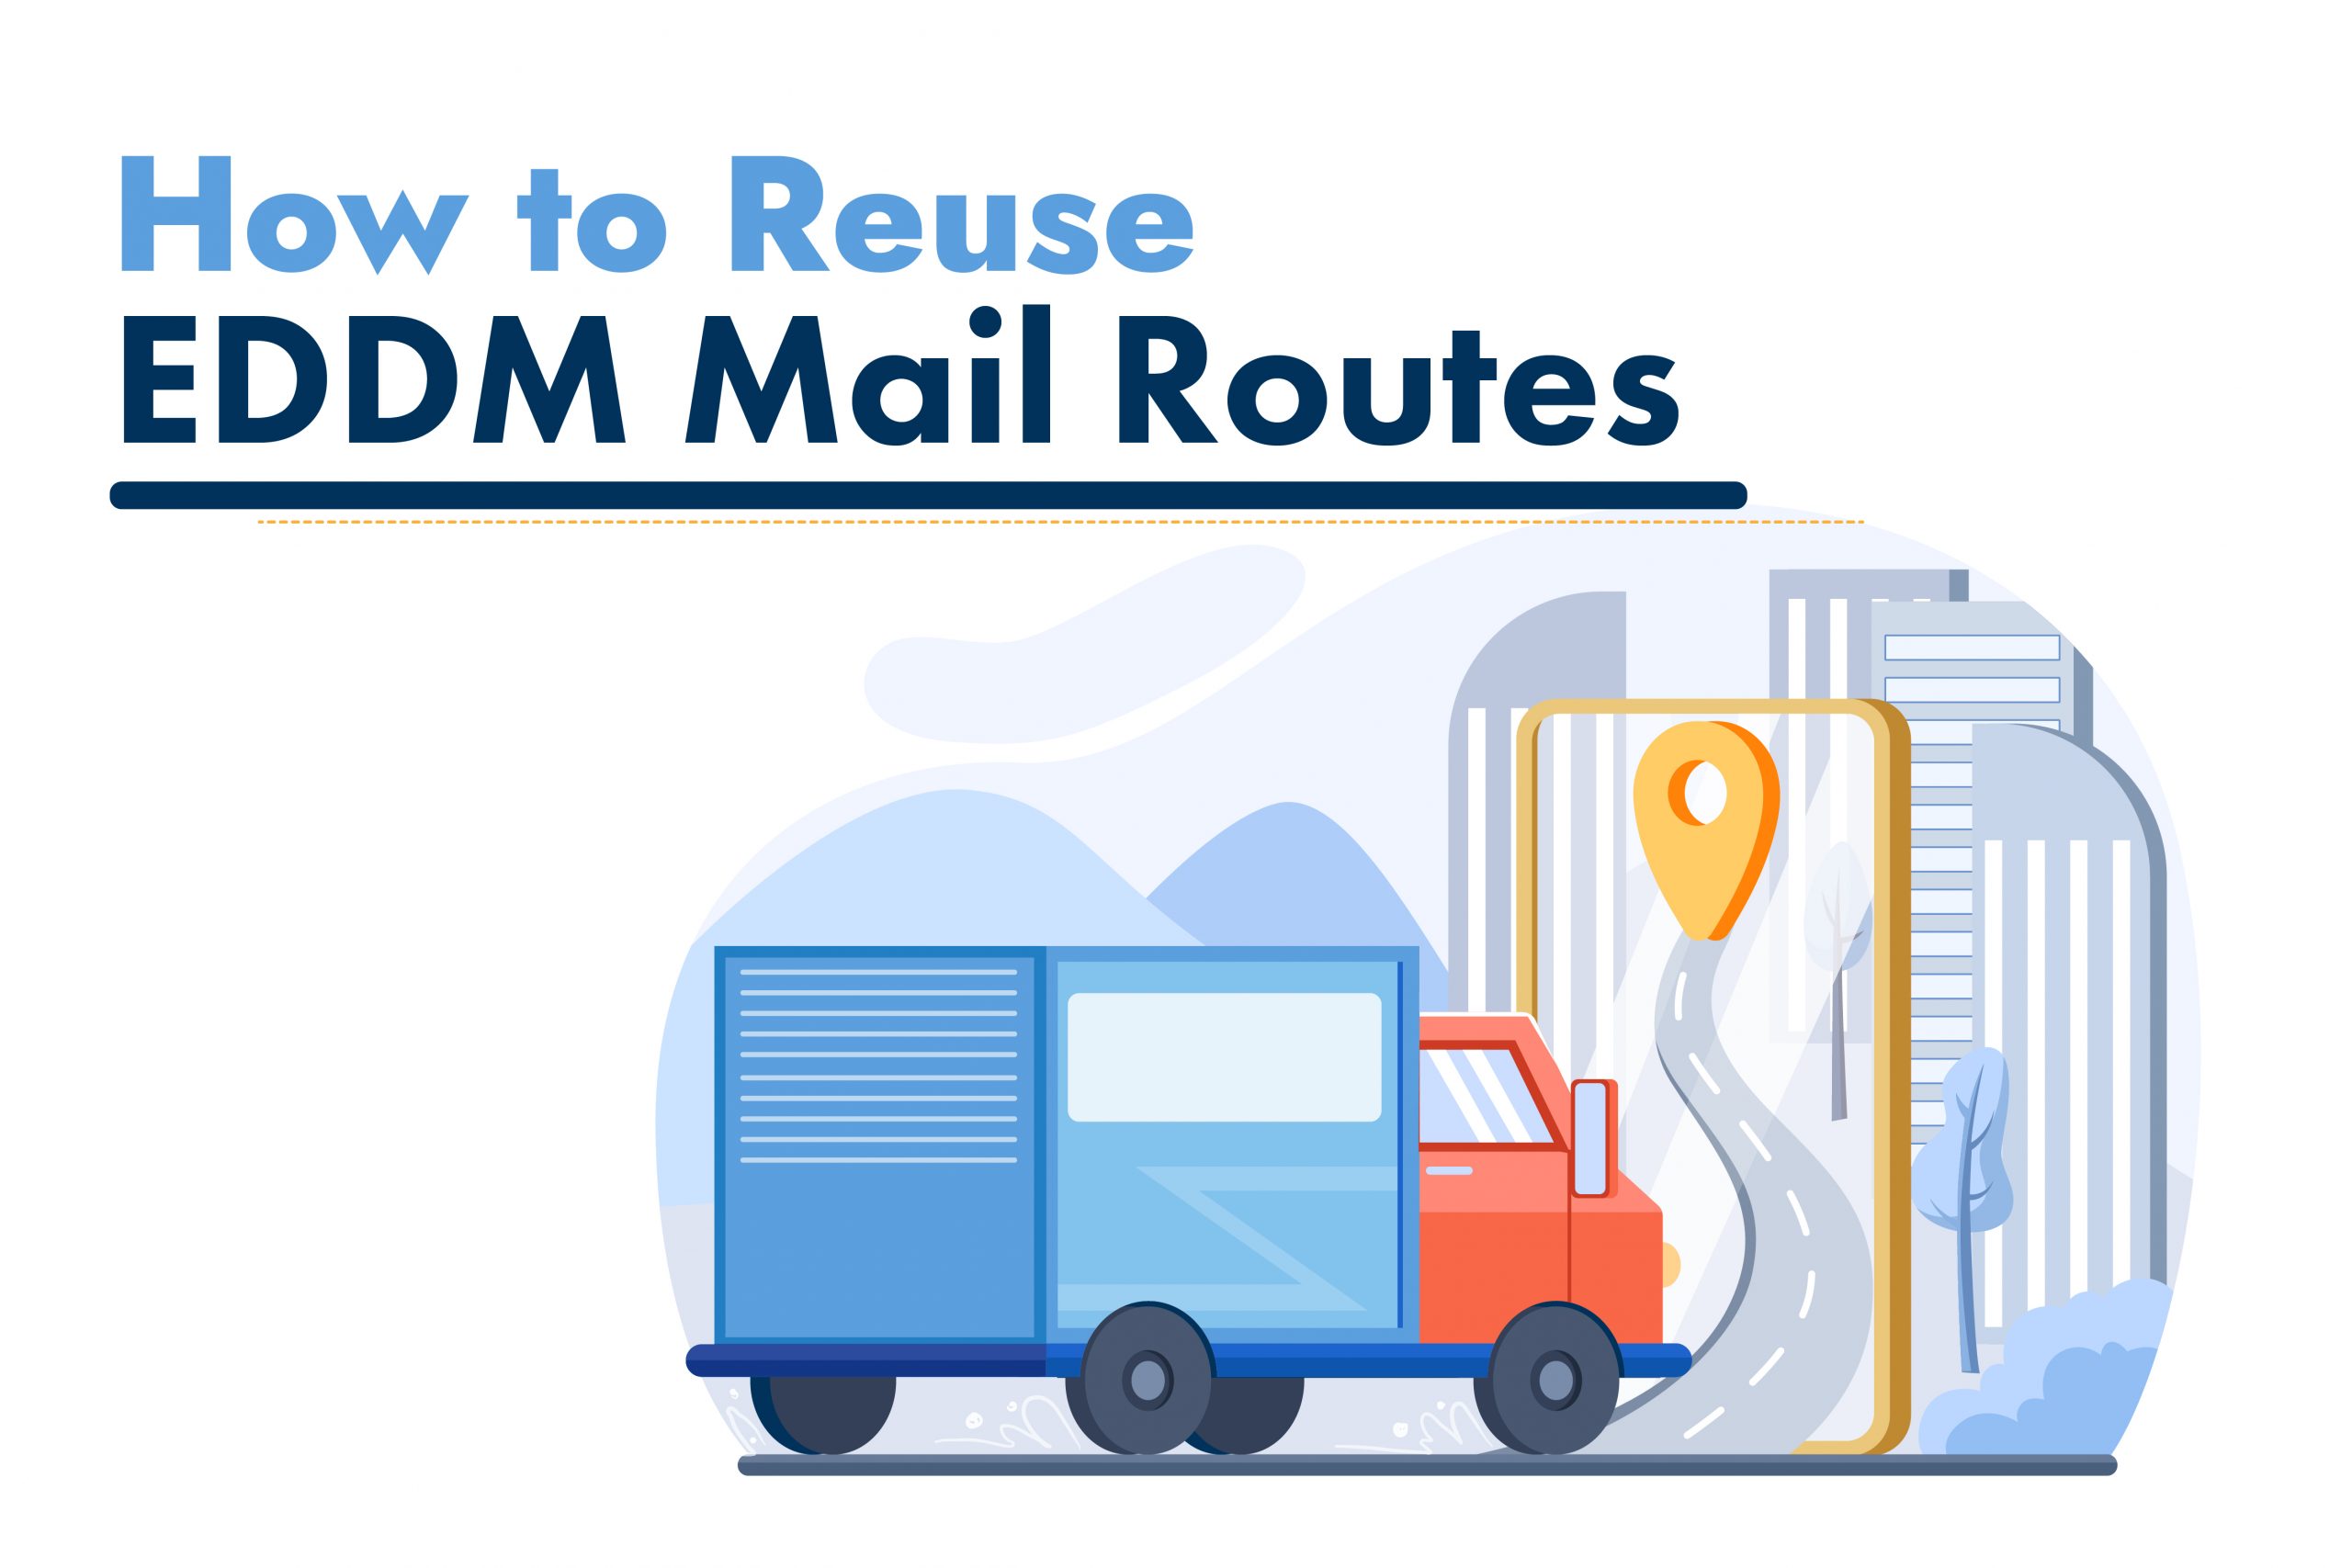 how to reuse EDDM mail routes